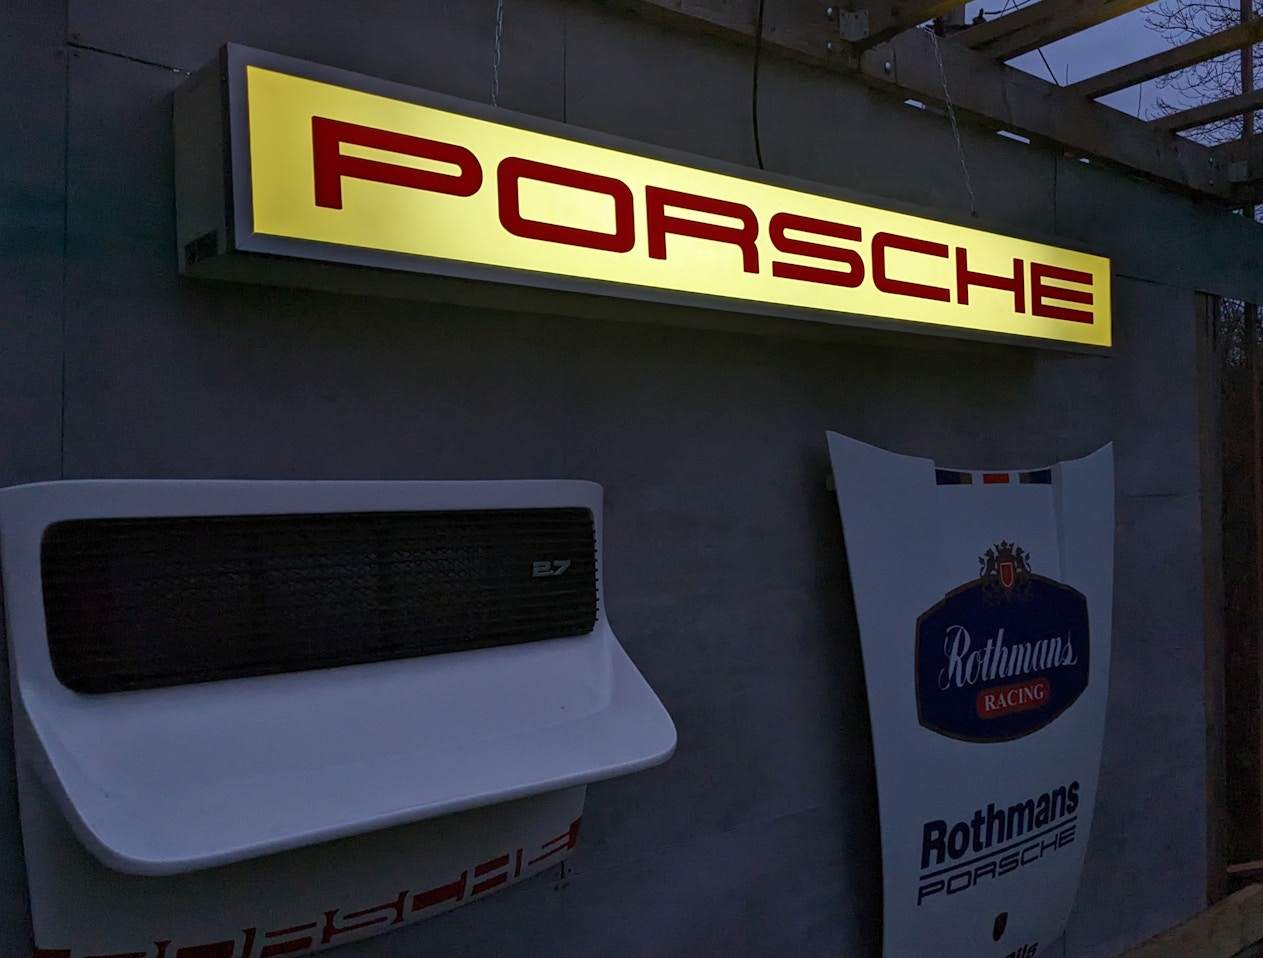 PORSCHE ILLUMINATED SIGN for sale by auction in St Albans, Hertfordshire,  United Kingdom